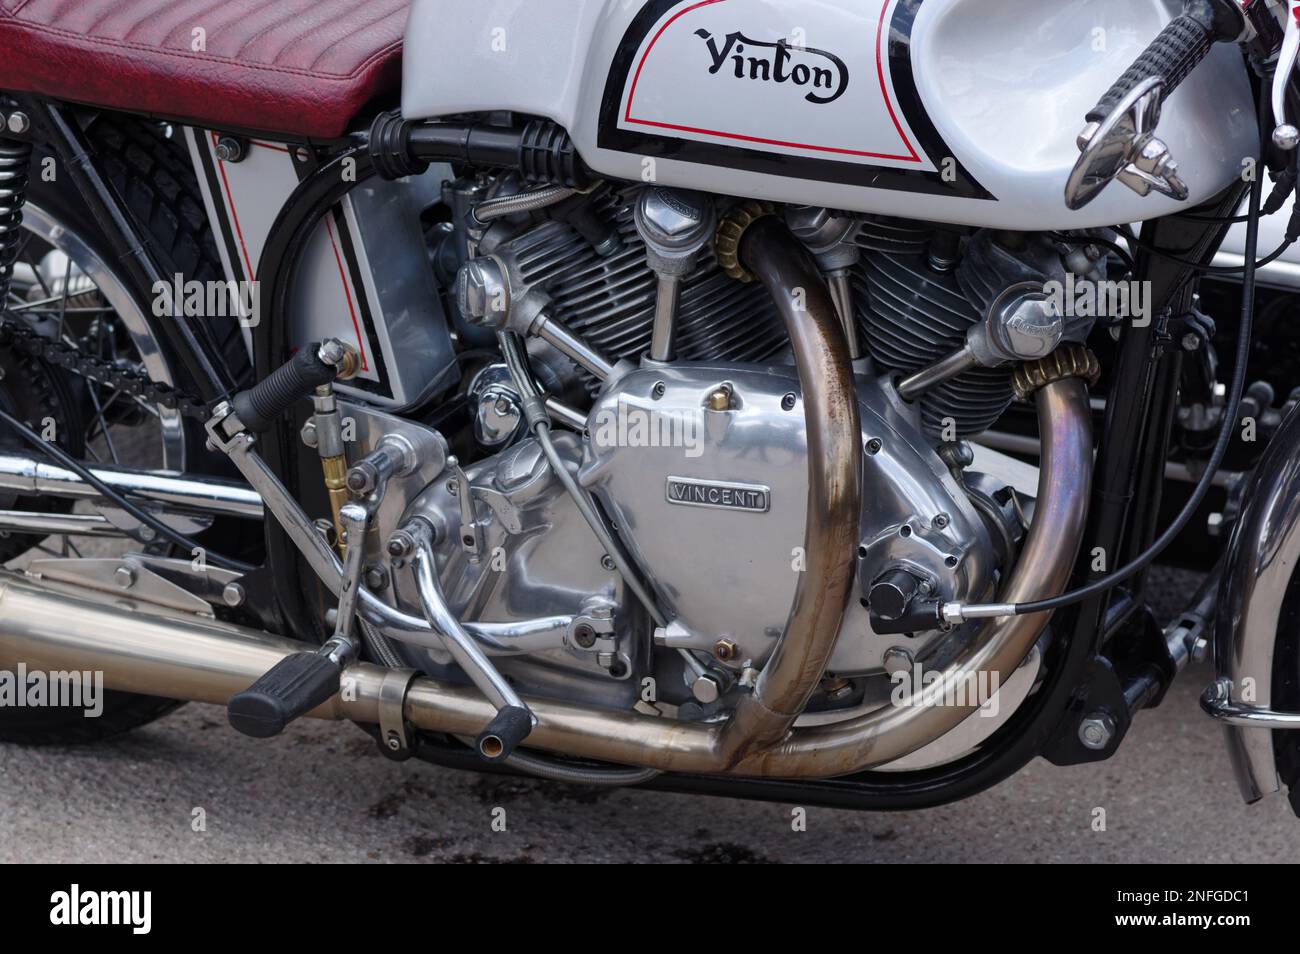 A 1,000cc Vincent V-twin engine in a Norton Featherbed frame, with clip-on handlebars and rear-set footrests and controls. Stock Photo